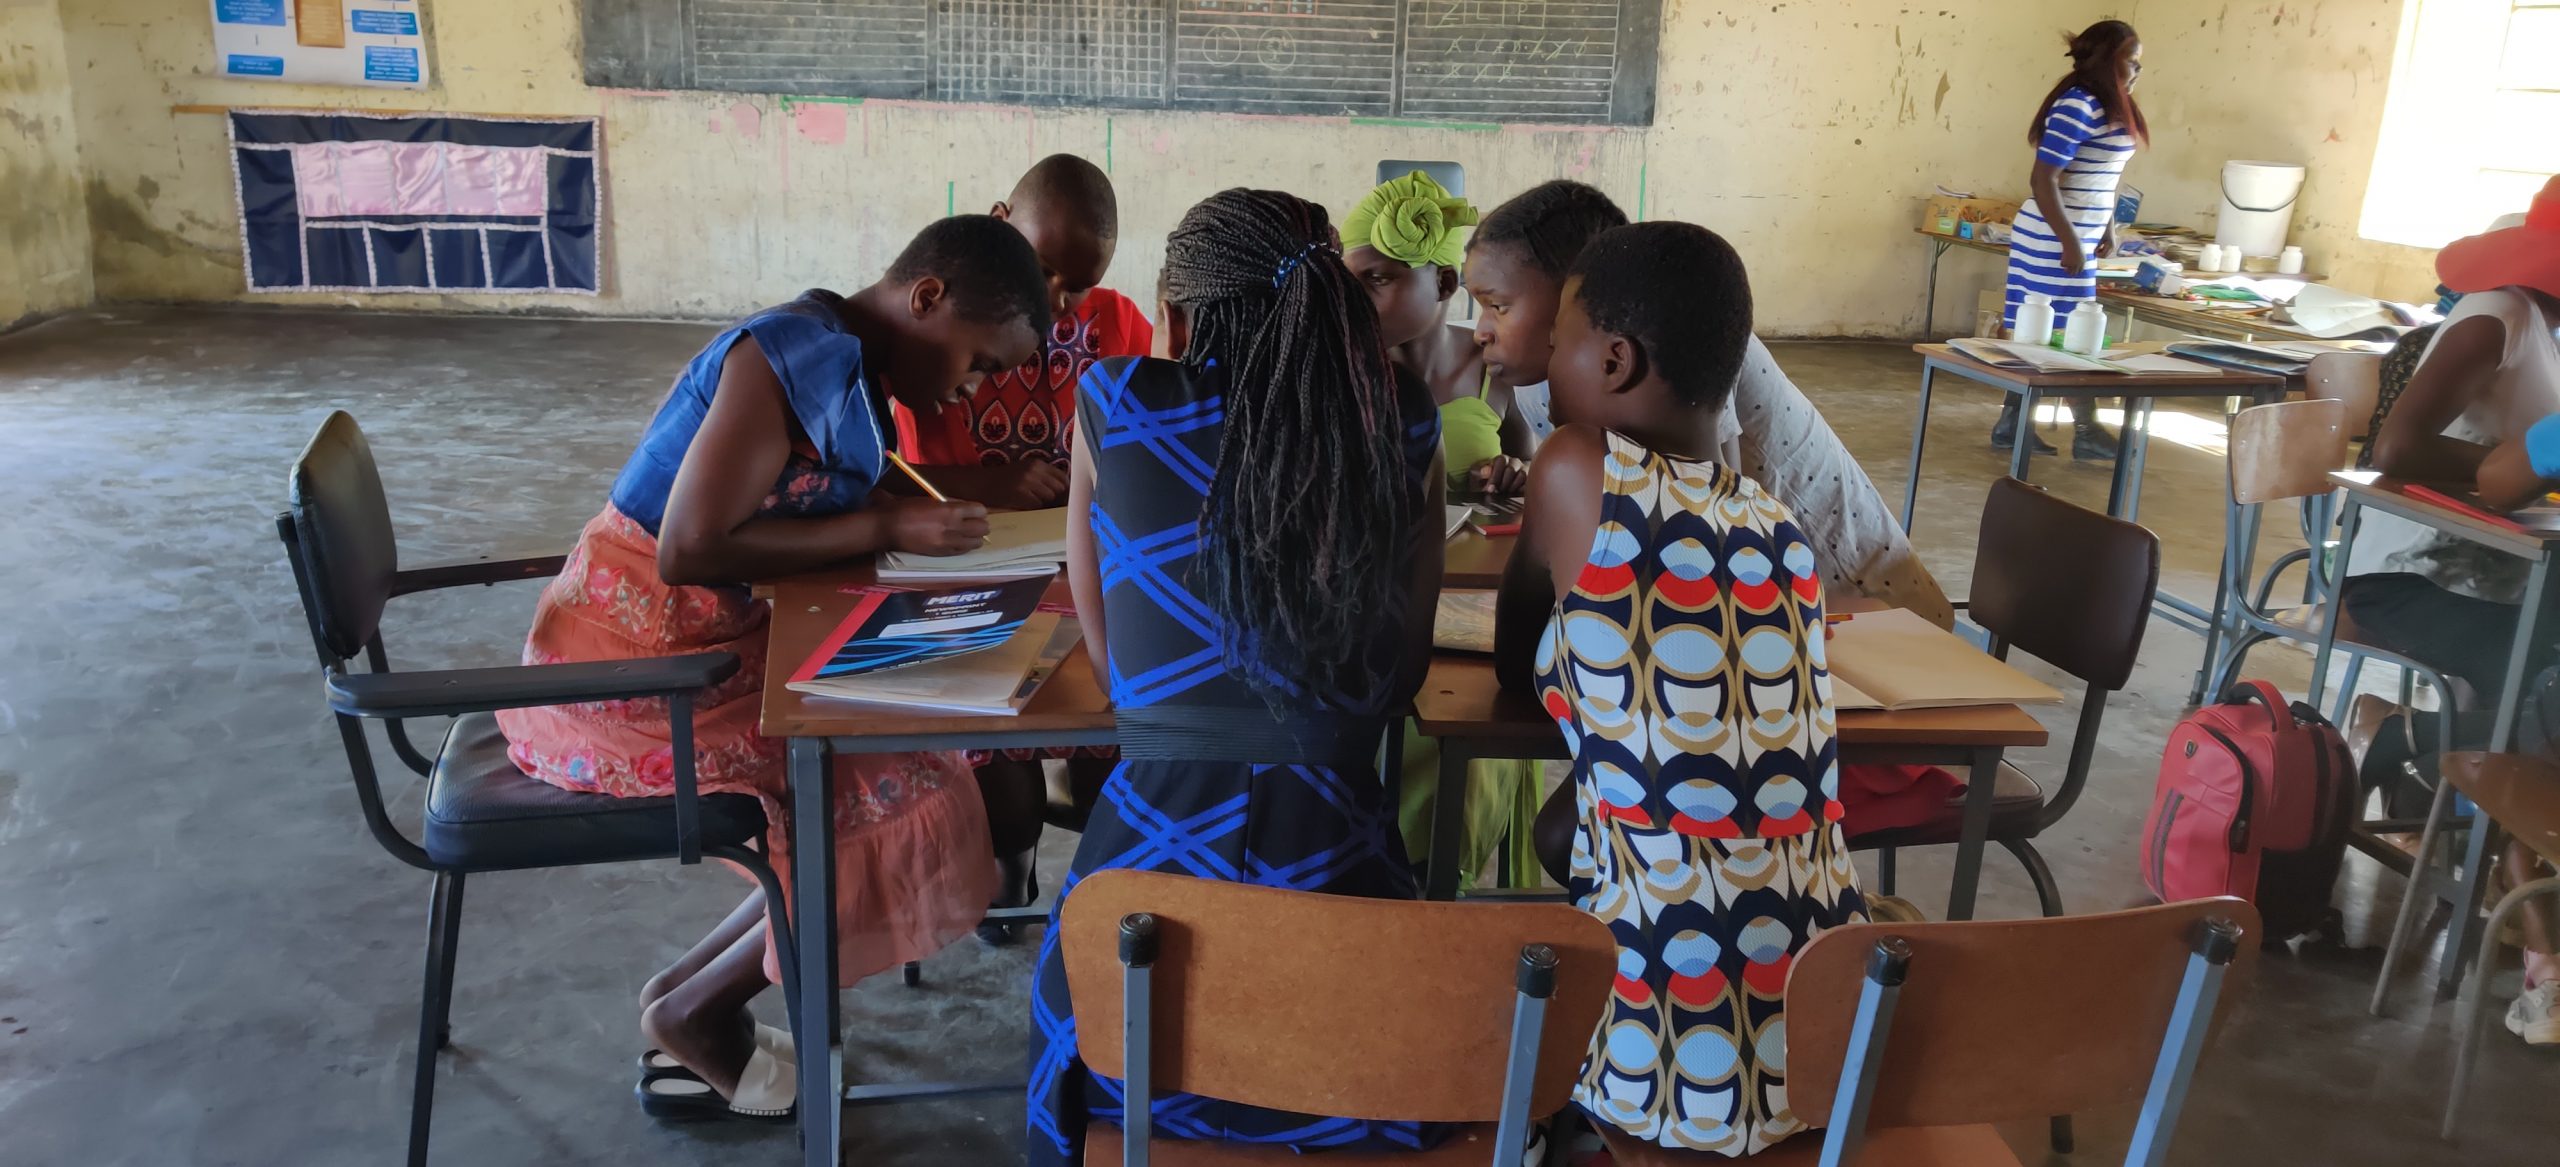 A group of African students grouped around a table working in a classroom